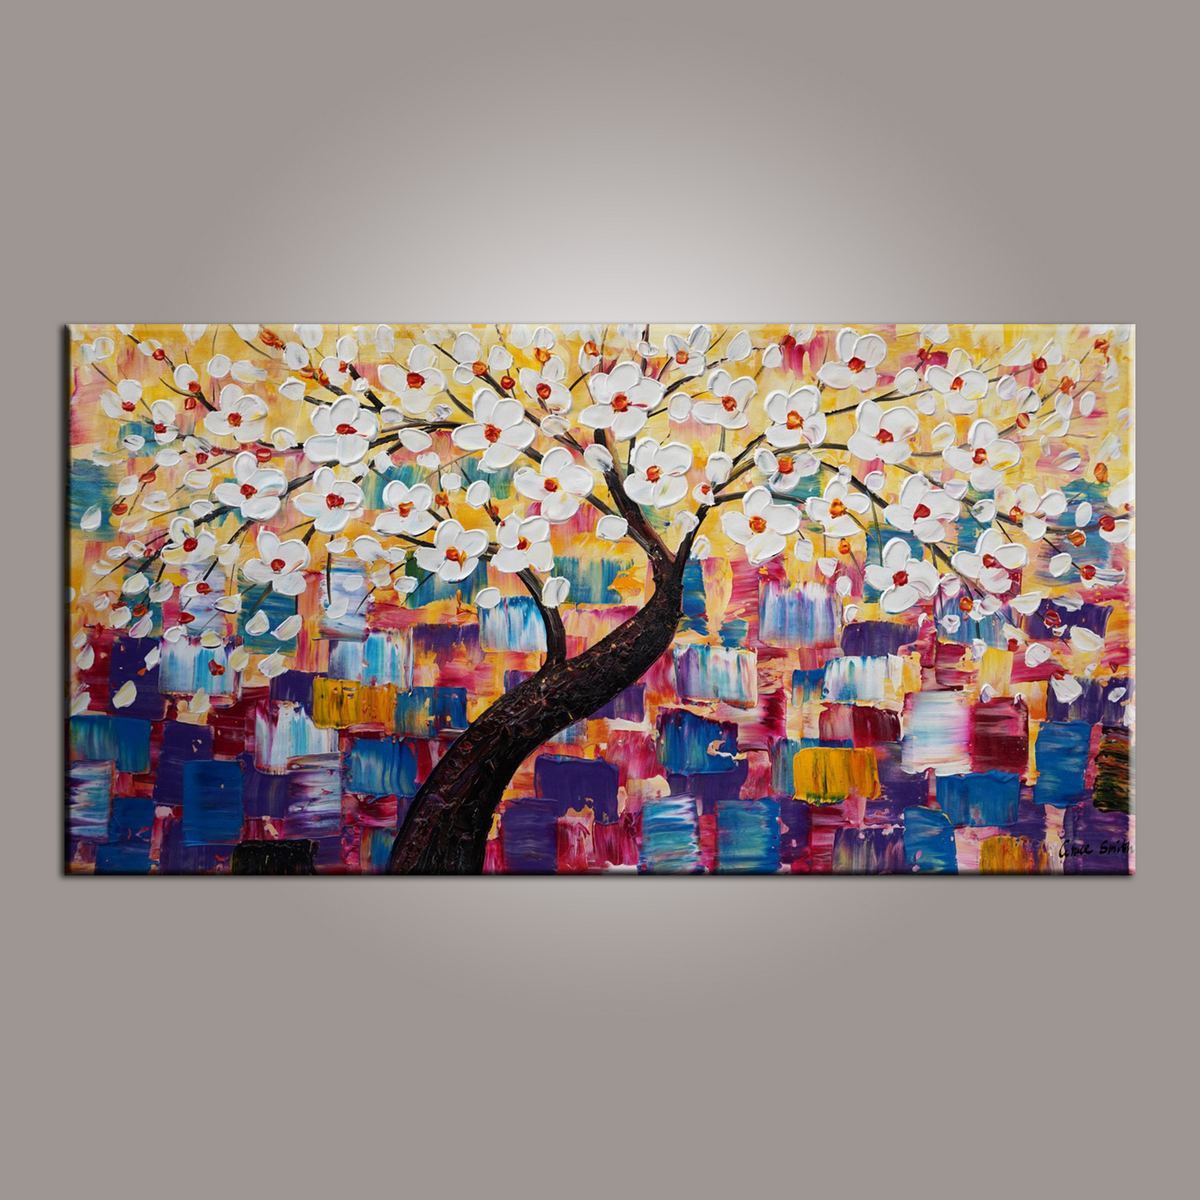 Painting on Sale, Canvas Art, Flower Tree Painting, Abstract Art Painting, Living Room Wall Art, Art on Canvas, Modern Art, Contemporary Art-Art Painting Canvas